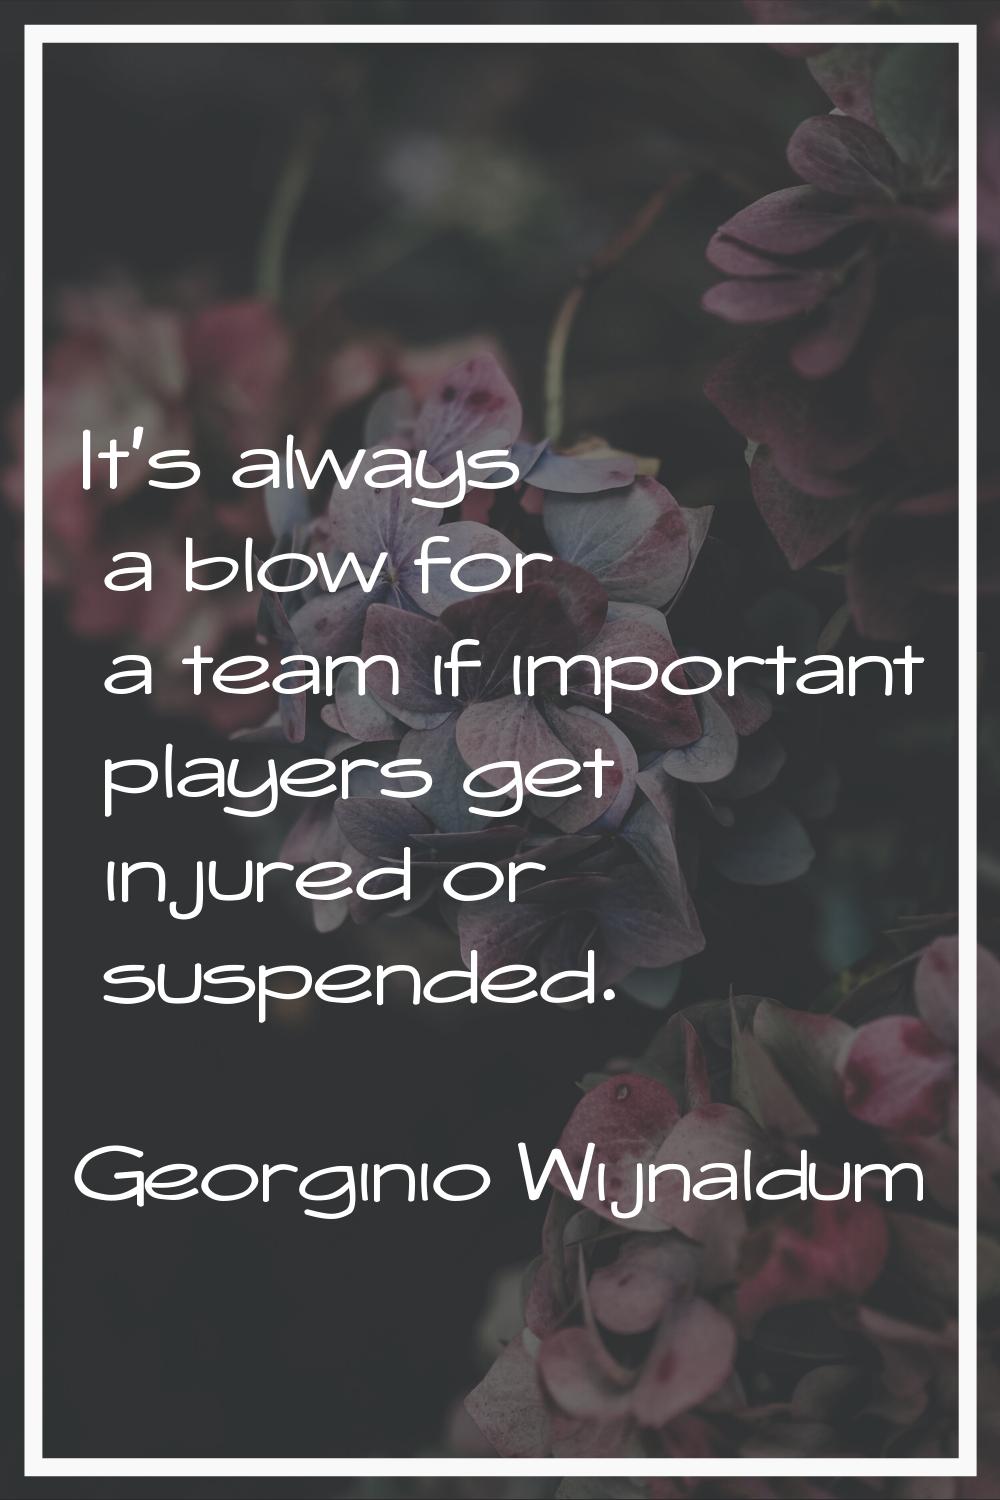 It's always a blow for a team if important players get injured or suspended.